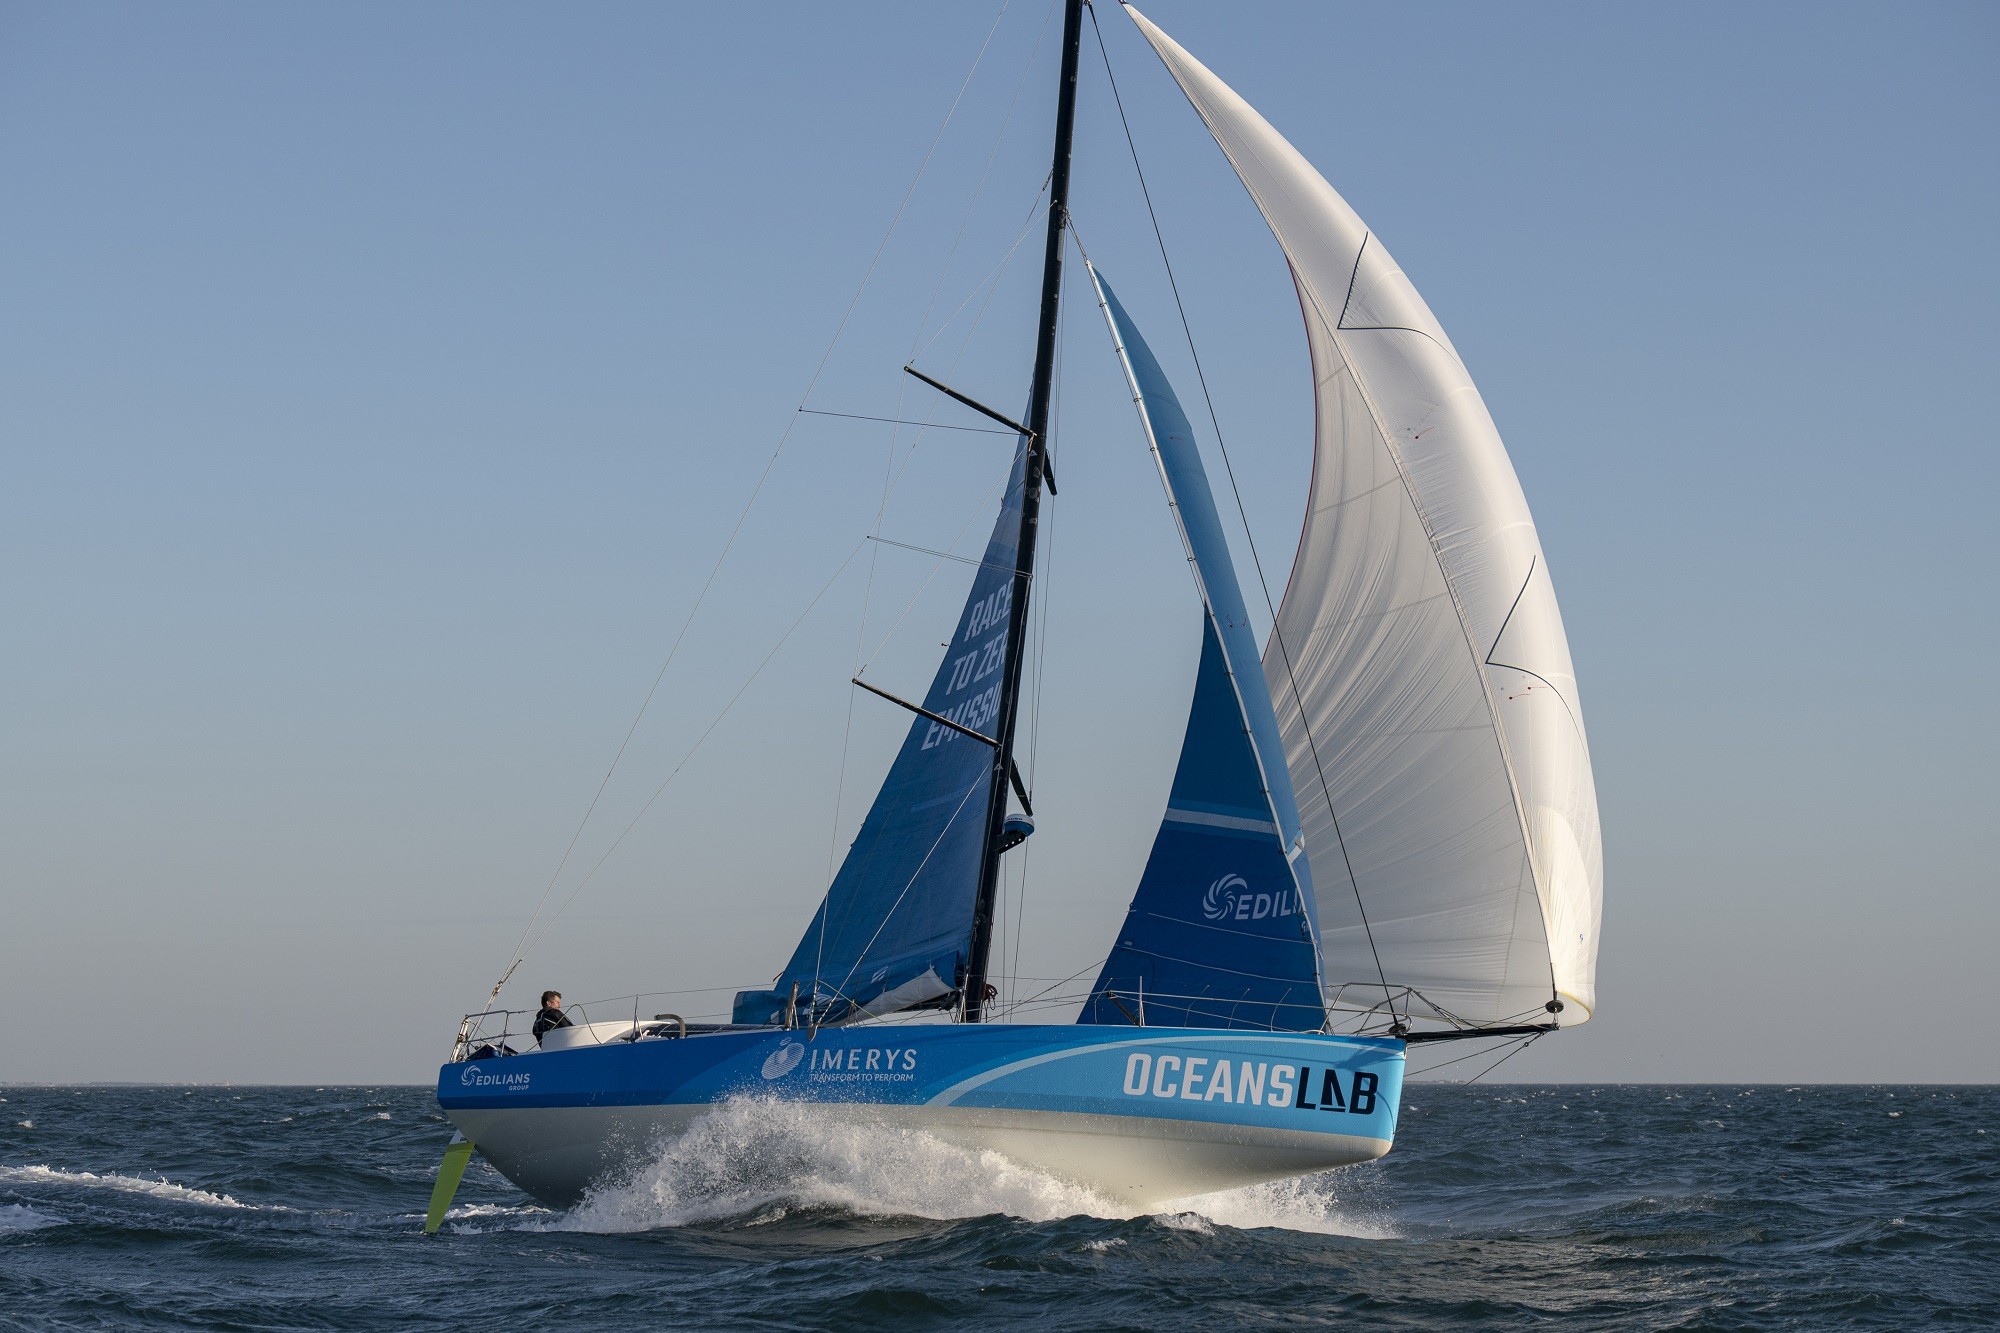 Marketing and the glamourous world of ocean racing